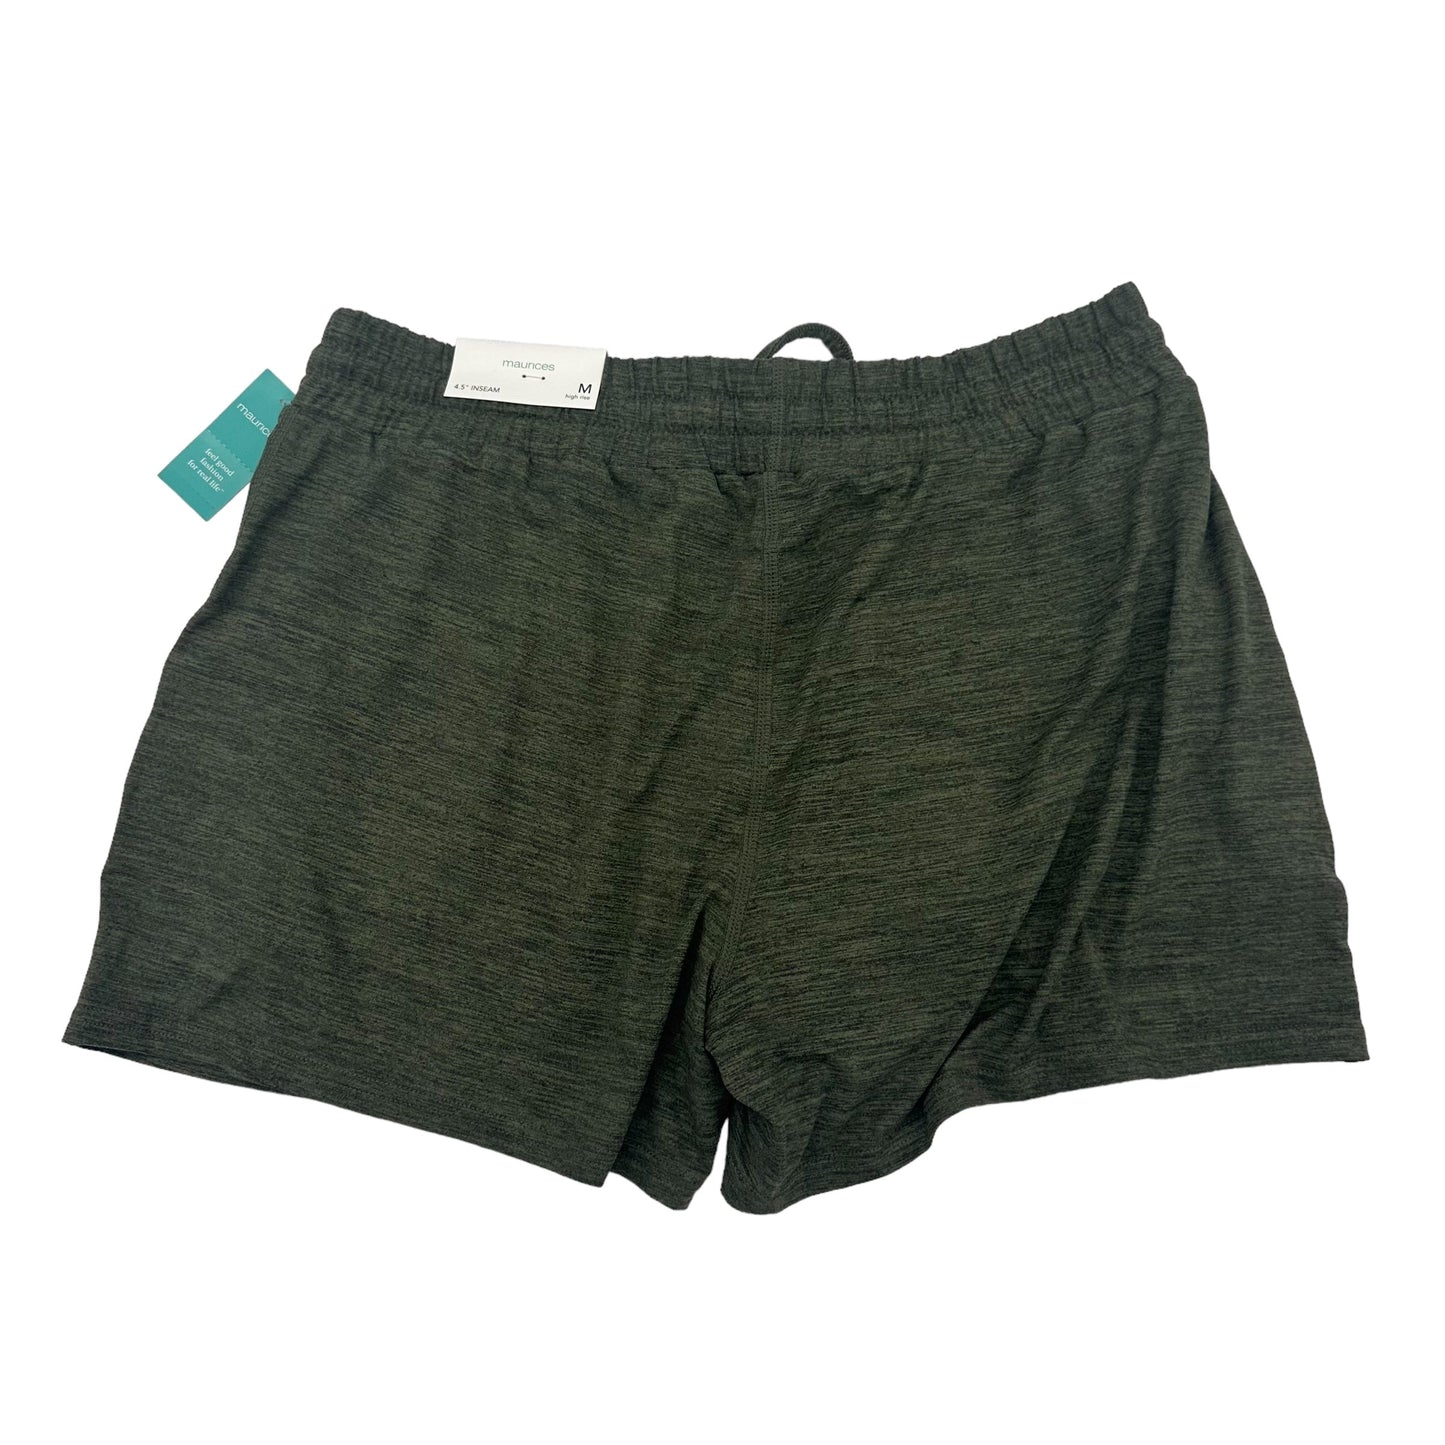 GREEN MAURICES SHORTS, Size M